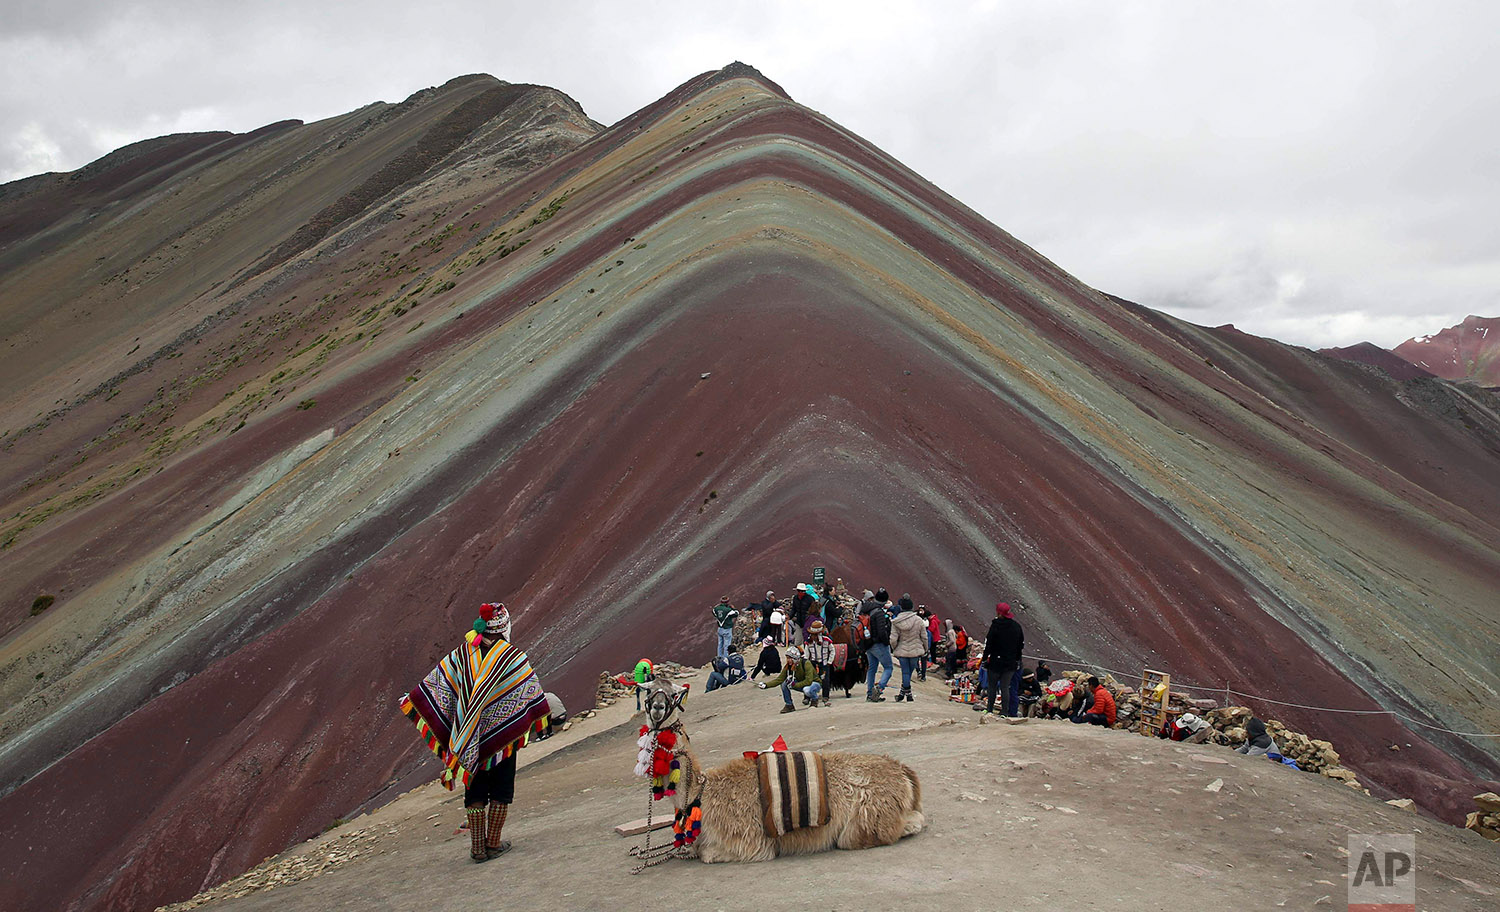  In this March 2, 2018 photo, an Andean guide rests with his llama as tourists take in the natural wonder of Rainbow Mountain, in Pitumarca, Peru. (AP Photo/Martin Mejia) 